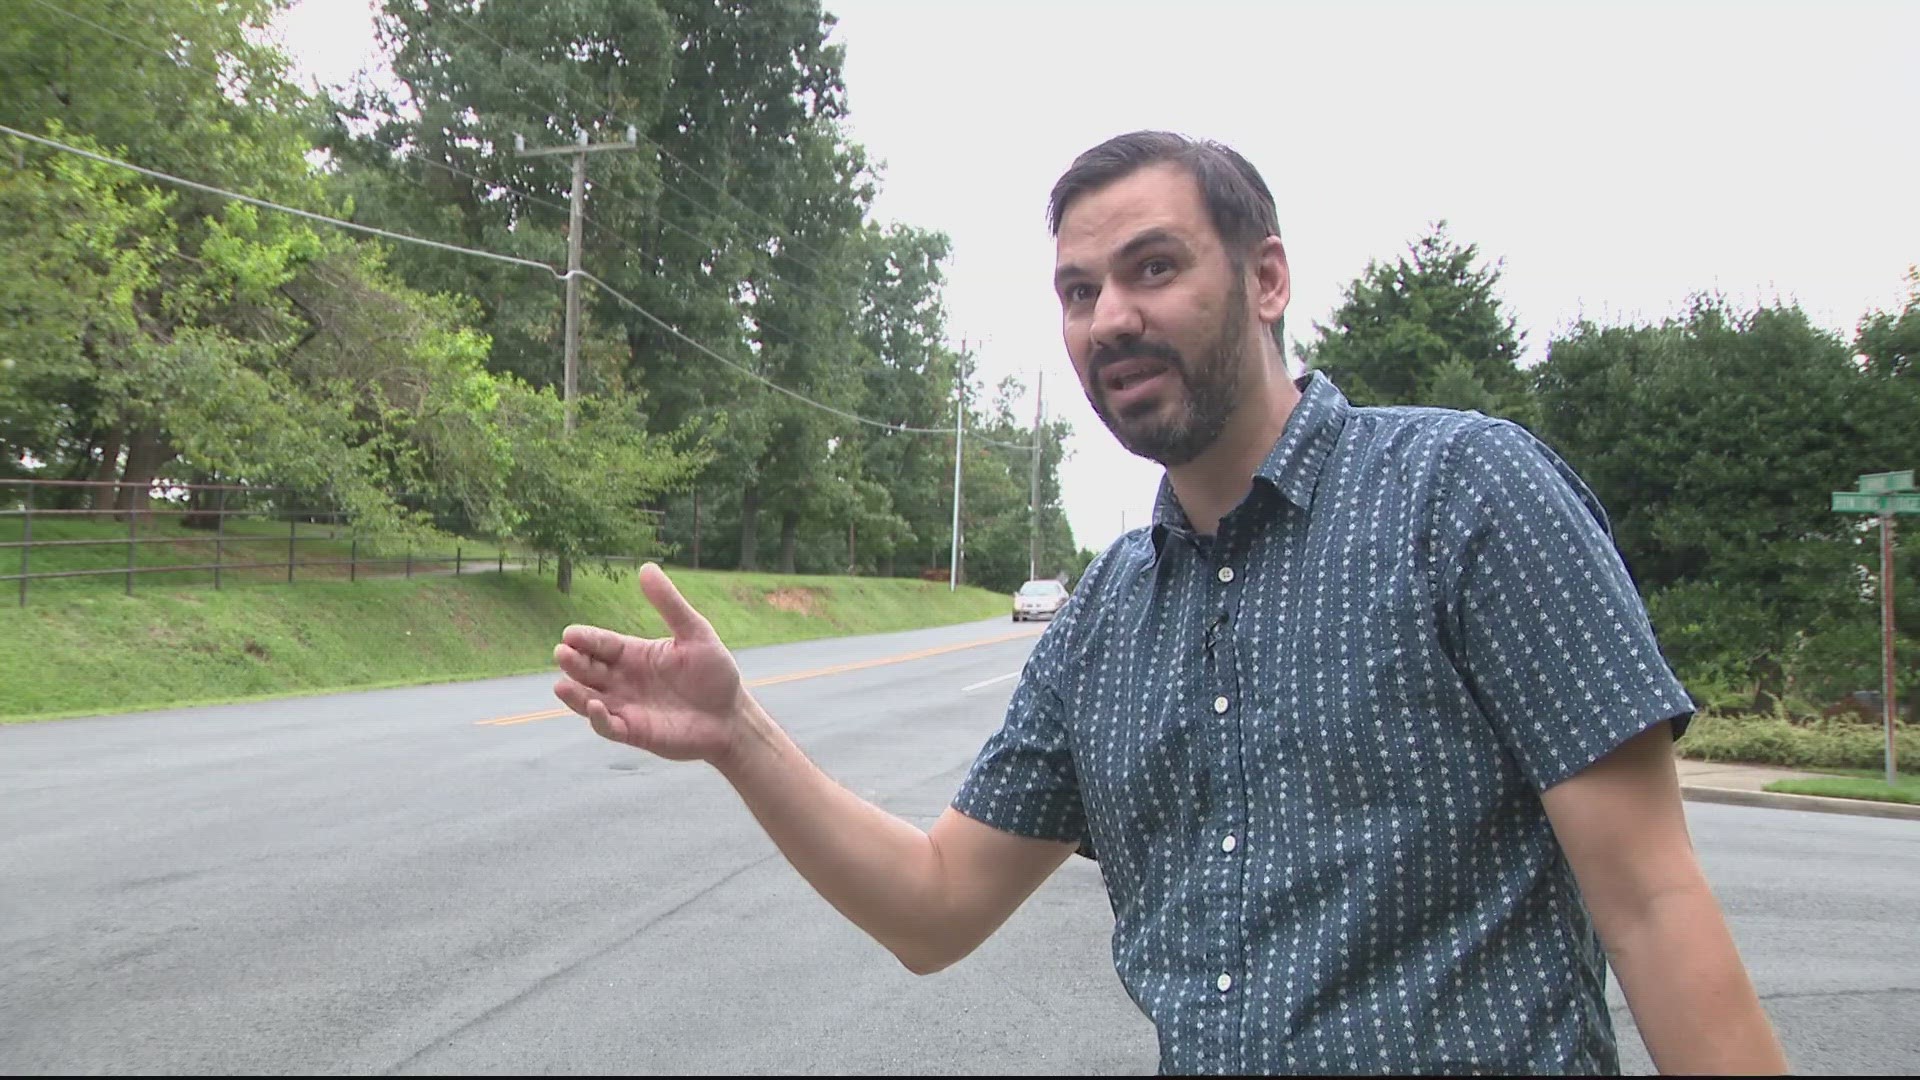 Neighbors on Linway Terrace are requesting that the Fairfax County Department of Transportation make changes to avoid pedestrian crashes.